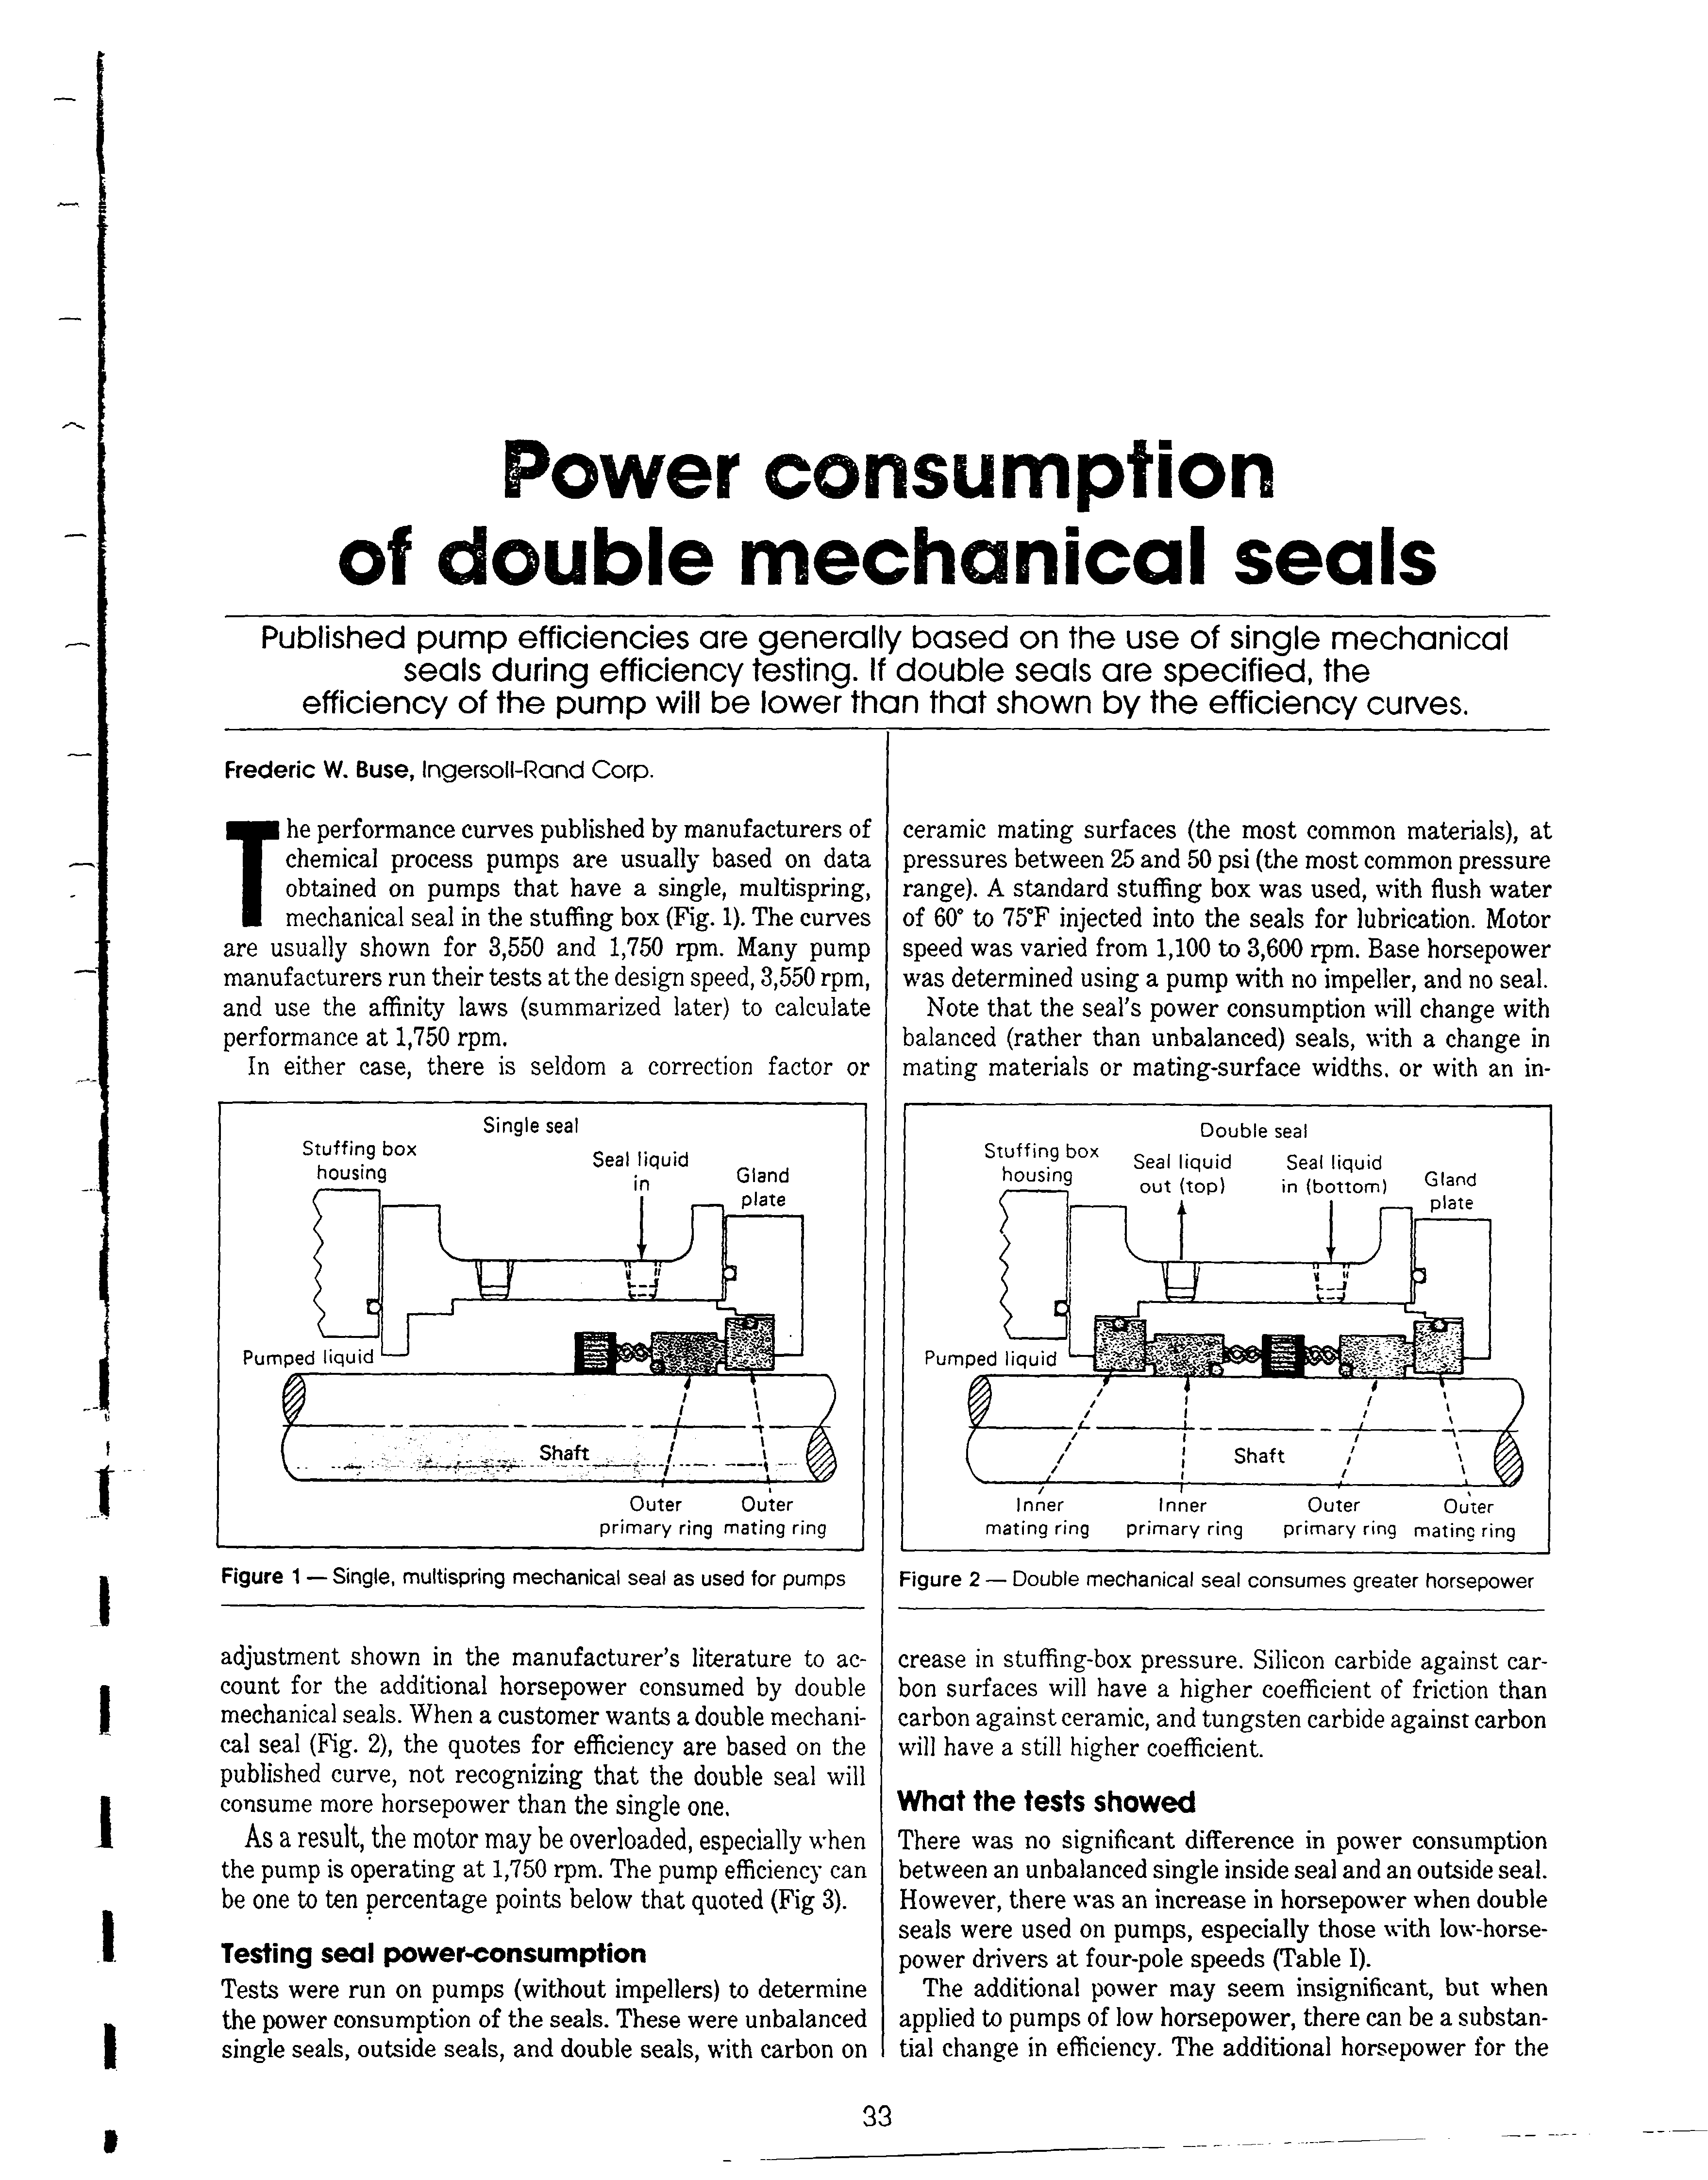 Figure 2 — Double mechanical seal consumes greater horsepower...